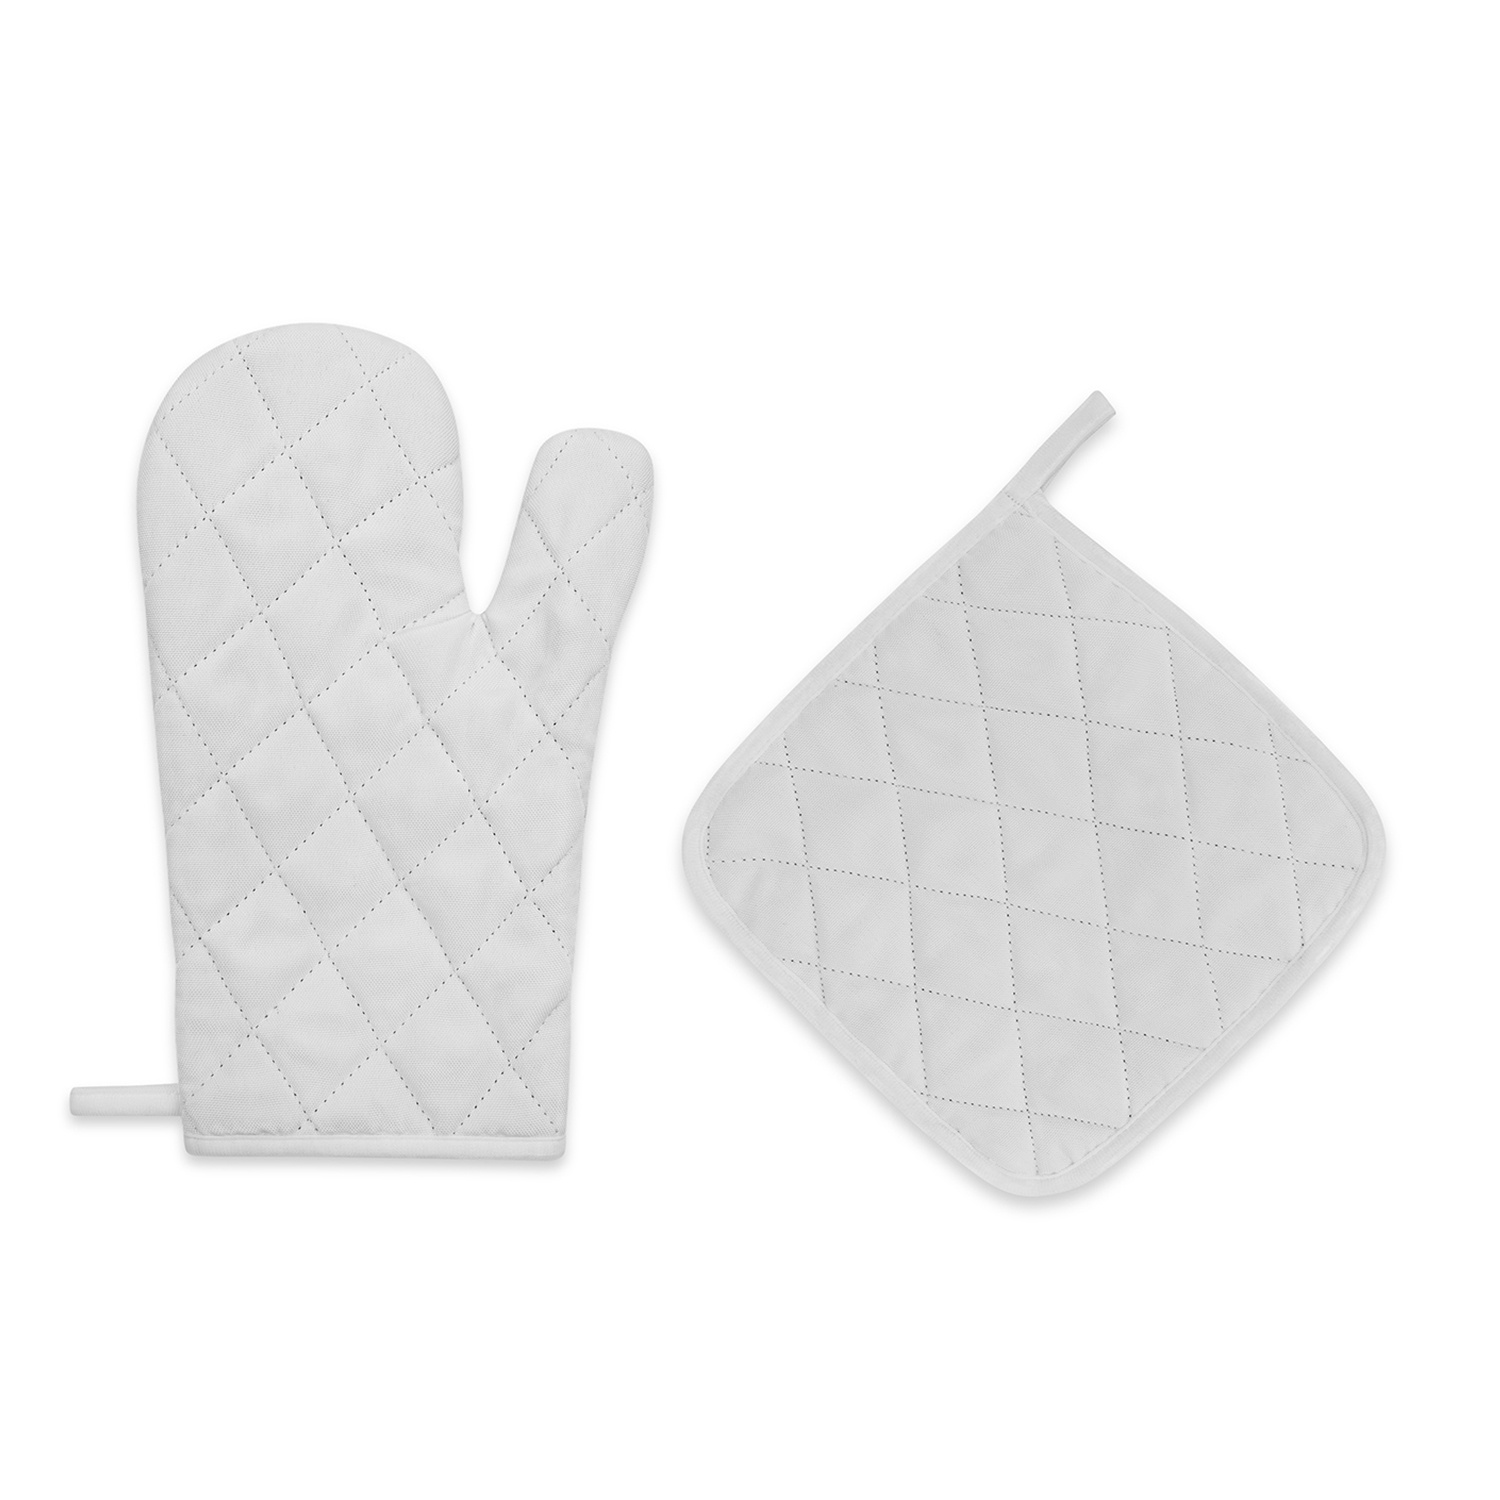 Microwave Oven Gloves & Insulation Pad | HugePOD